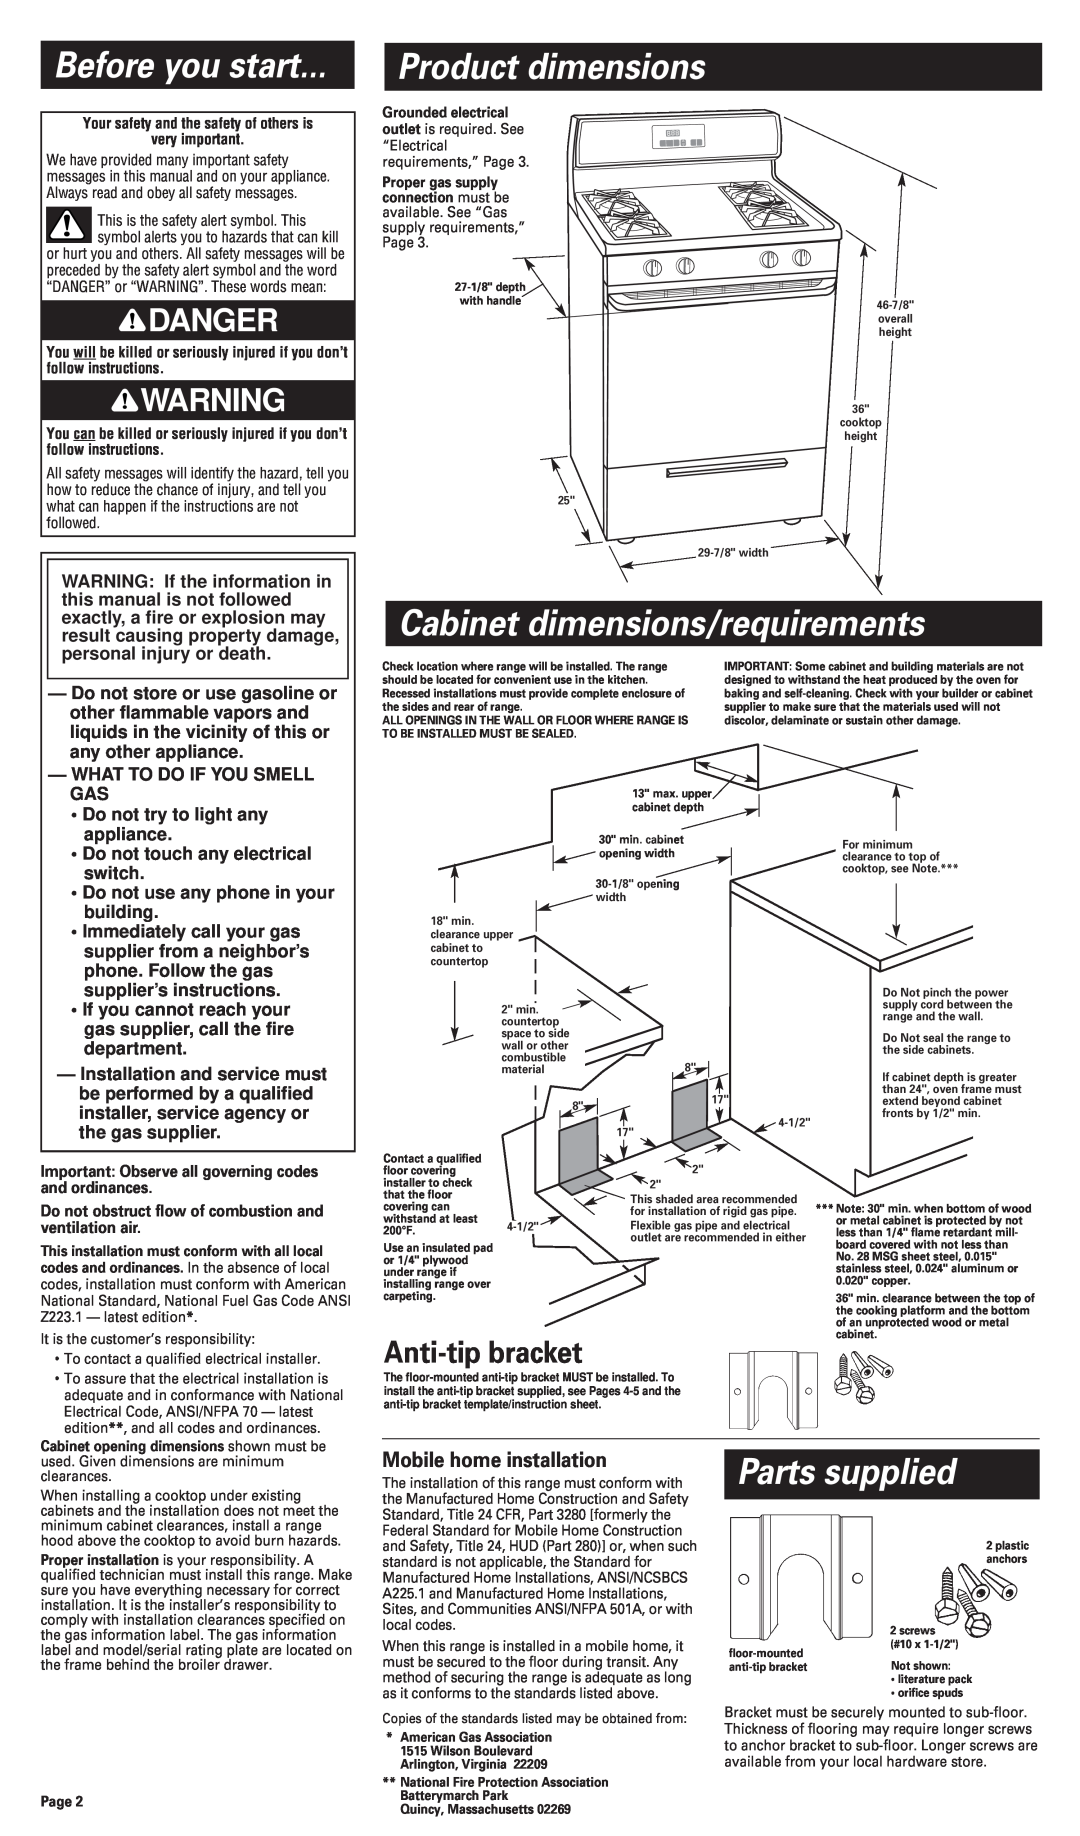 Whirlpool 8053365 Before you start, Product dimensions, Cabinet dimensions/requirements, Parts supplied, Anti-tip bracket 